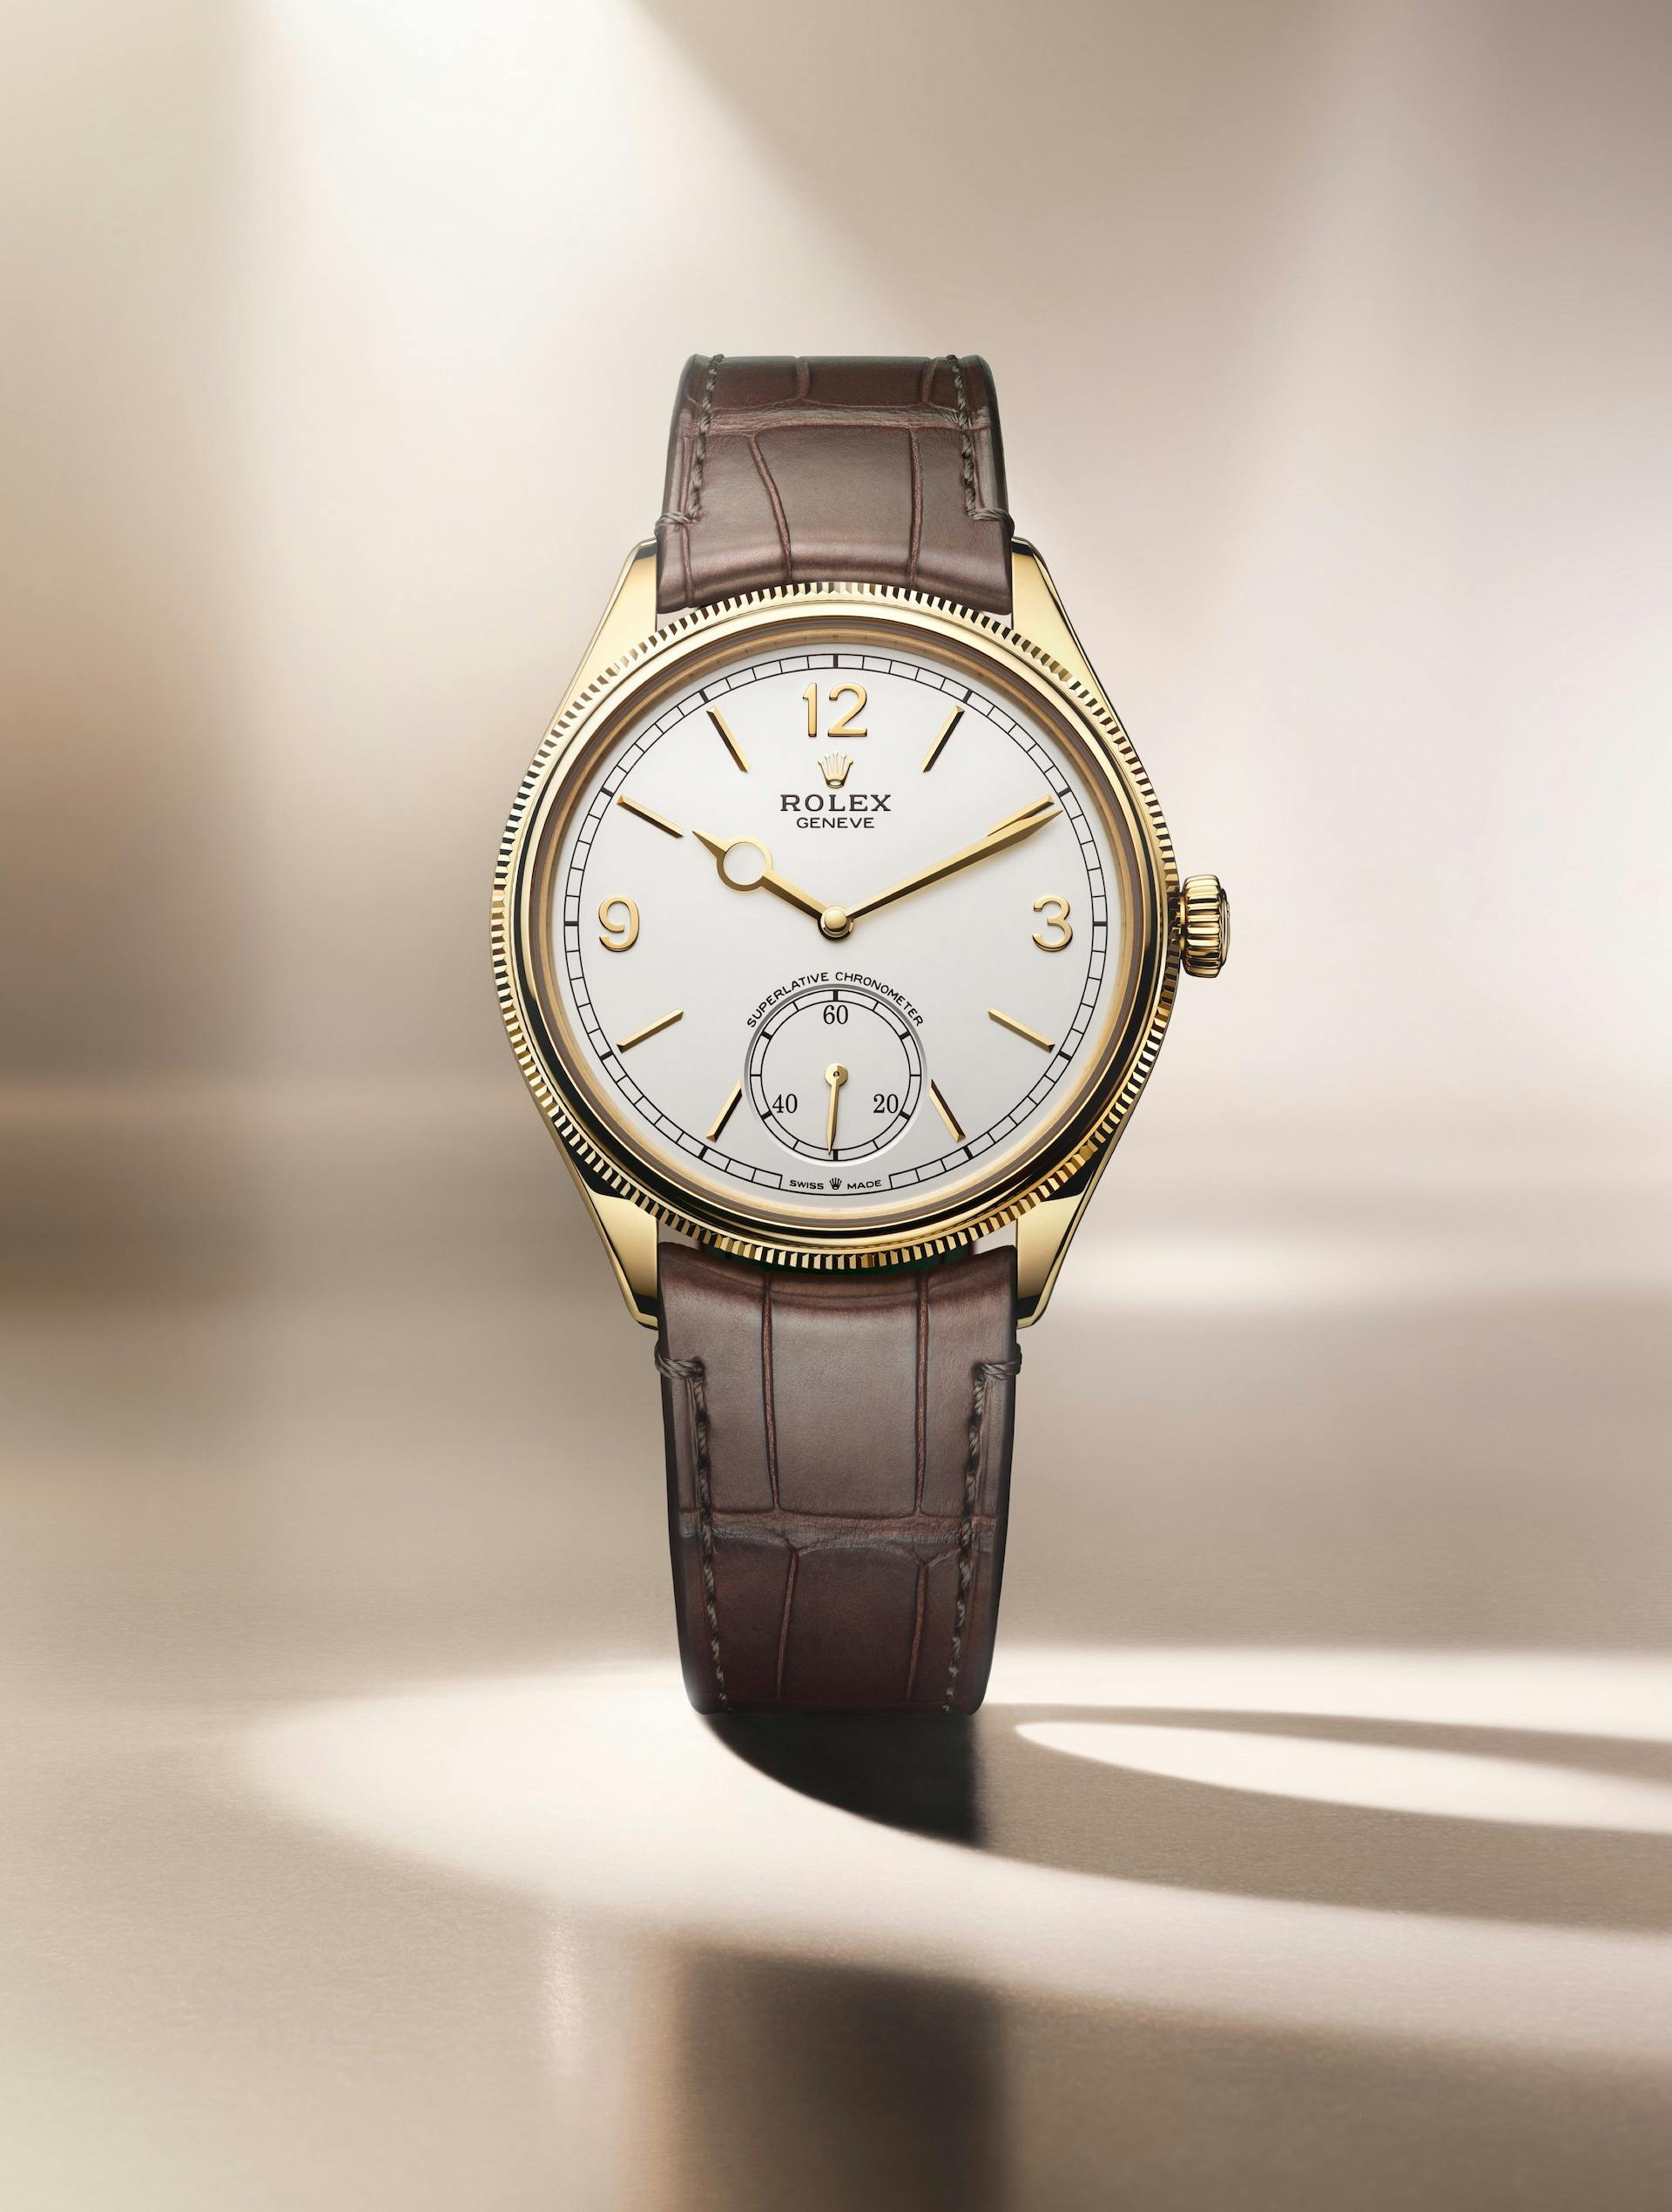 The new Rolex 1908 Dress Watch, based on a dial from 1931 with a new slim case, a new Calibre to power it and the small seconds at the six o'clock position. A fascinating move from Rolex that gained a lot of attention at the show this week. 